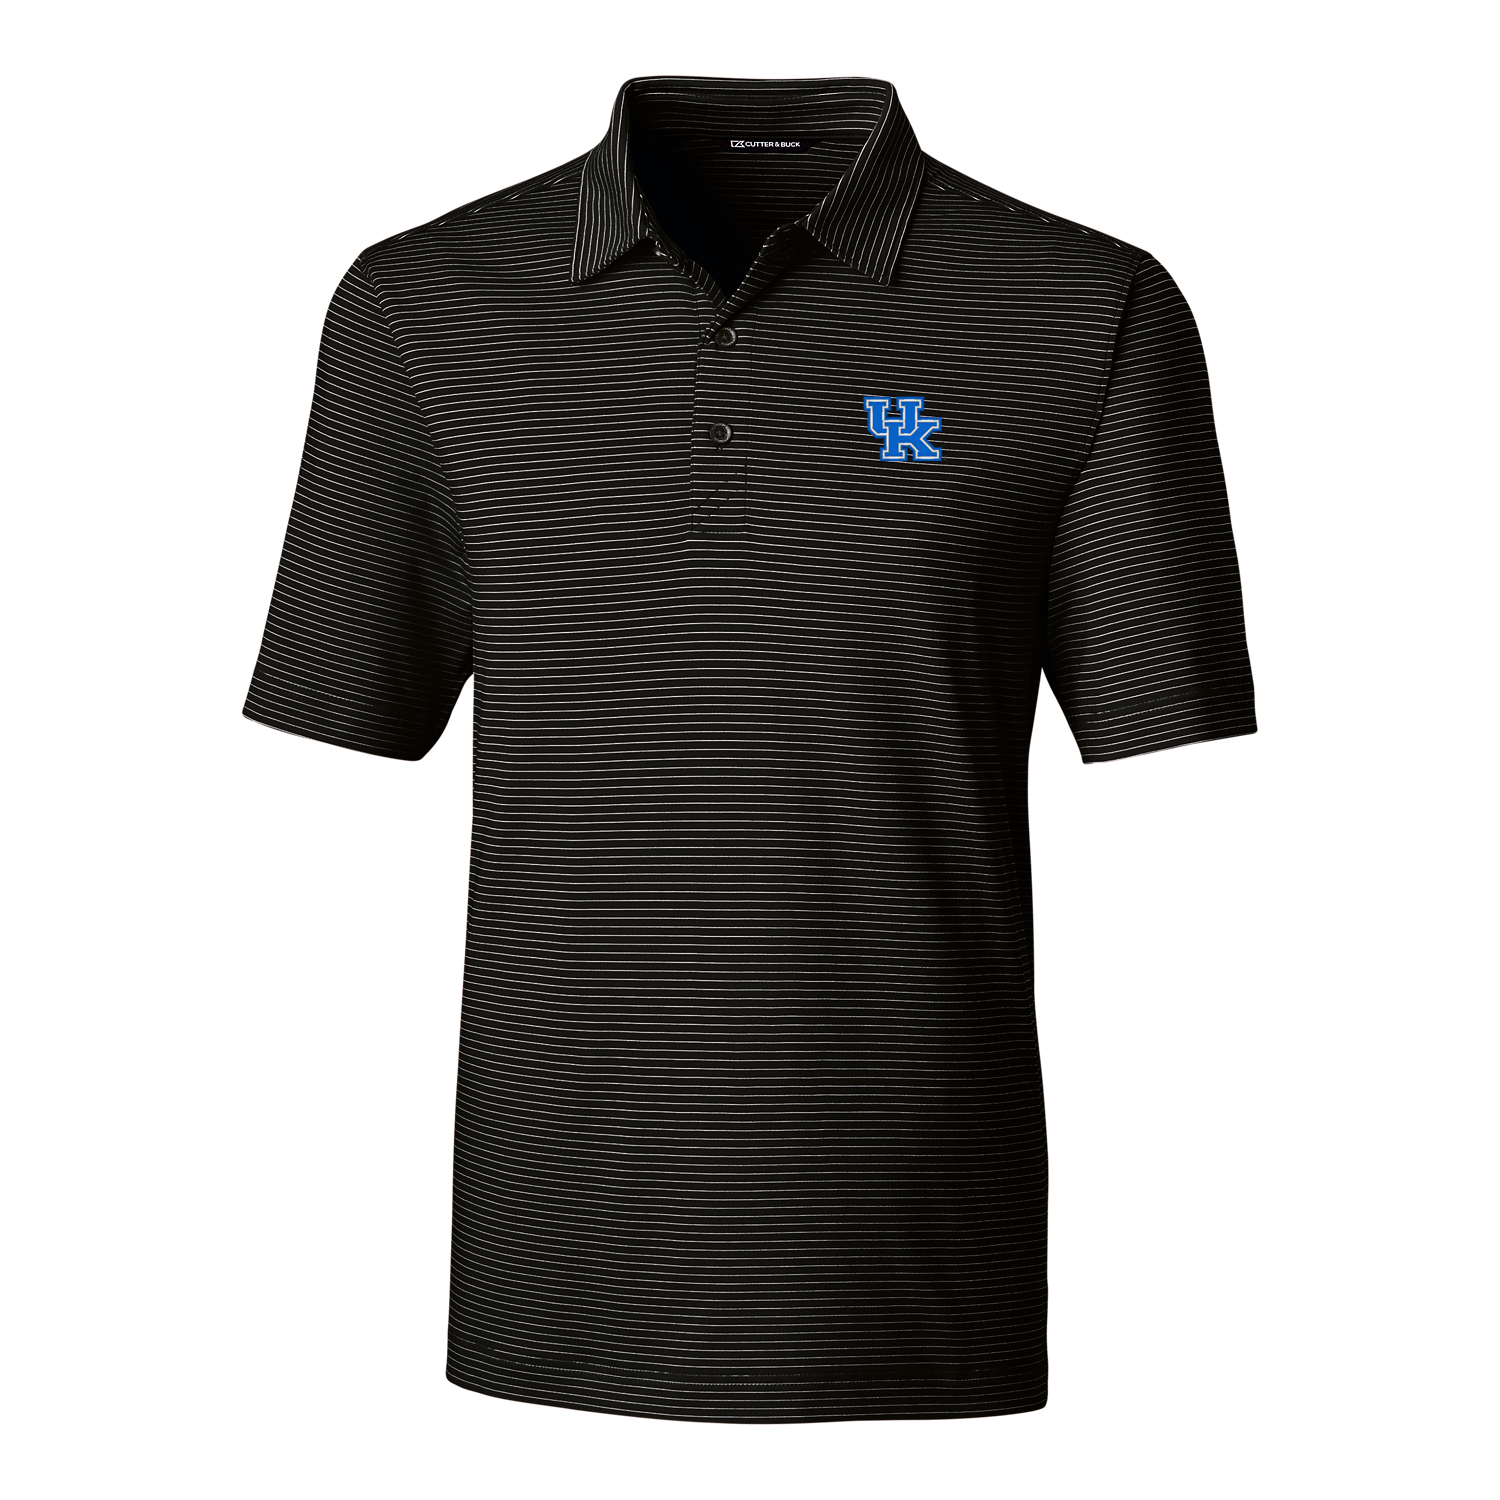 University of Kentucky Forge Pencil Stripe Polo in Black by Cutter & Buck